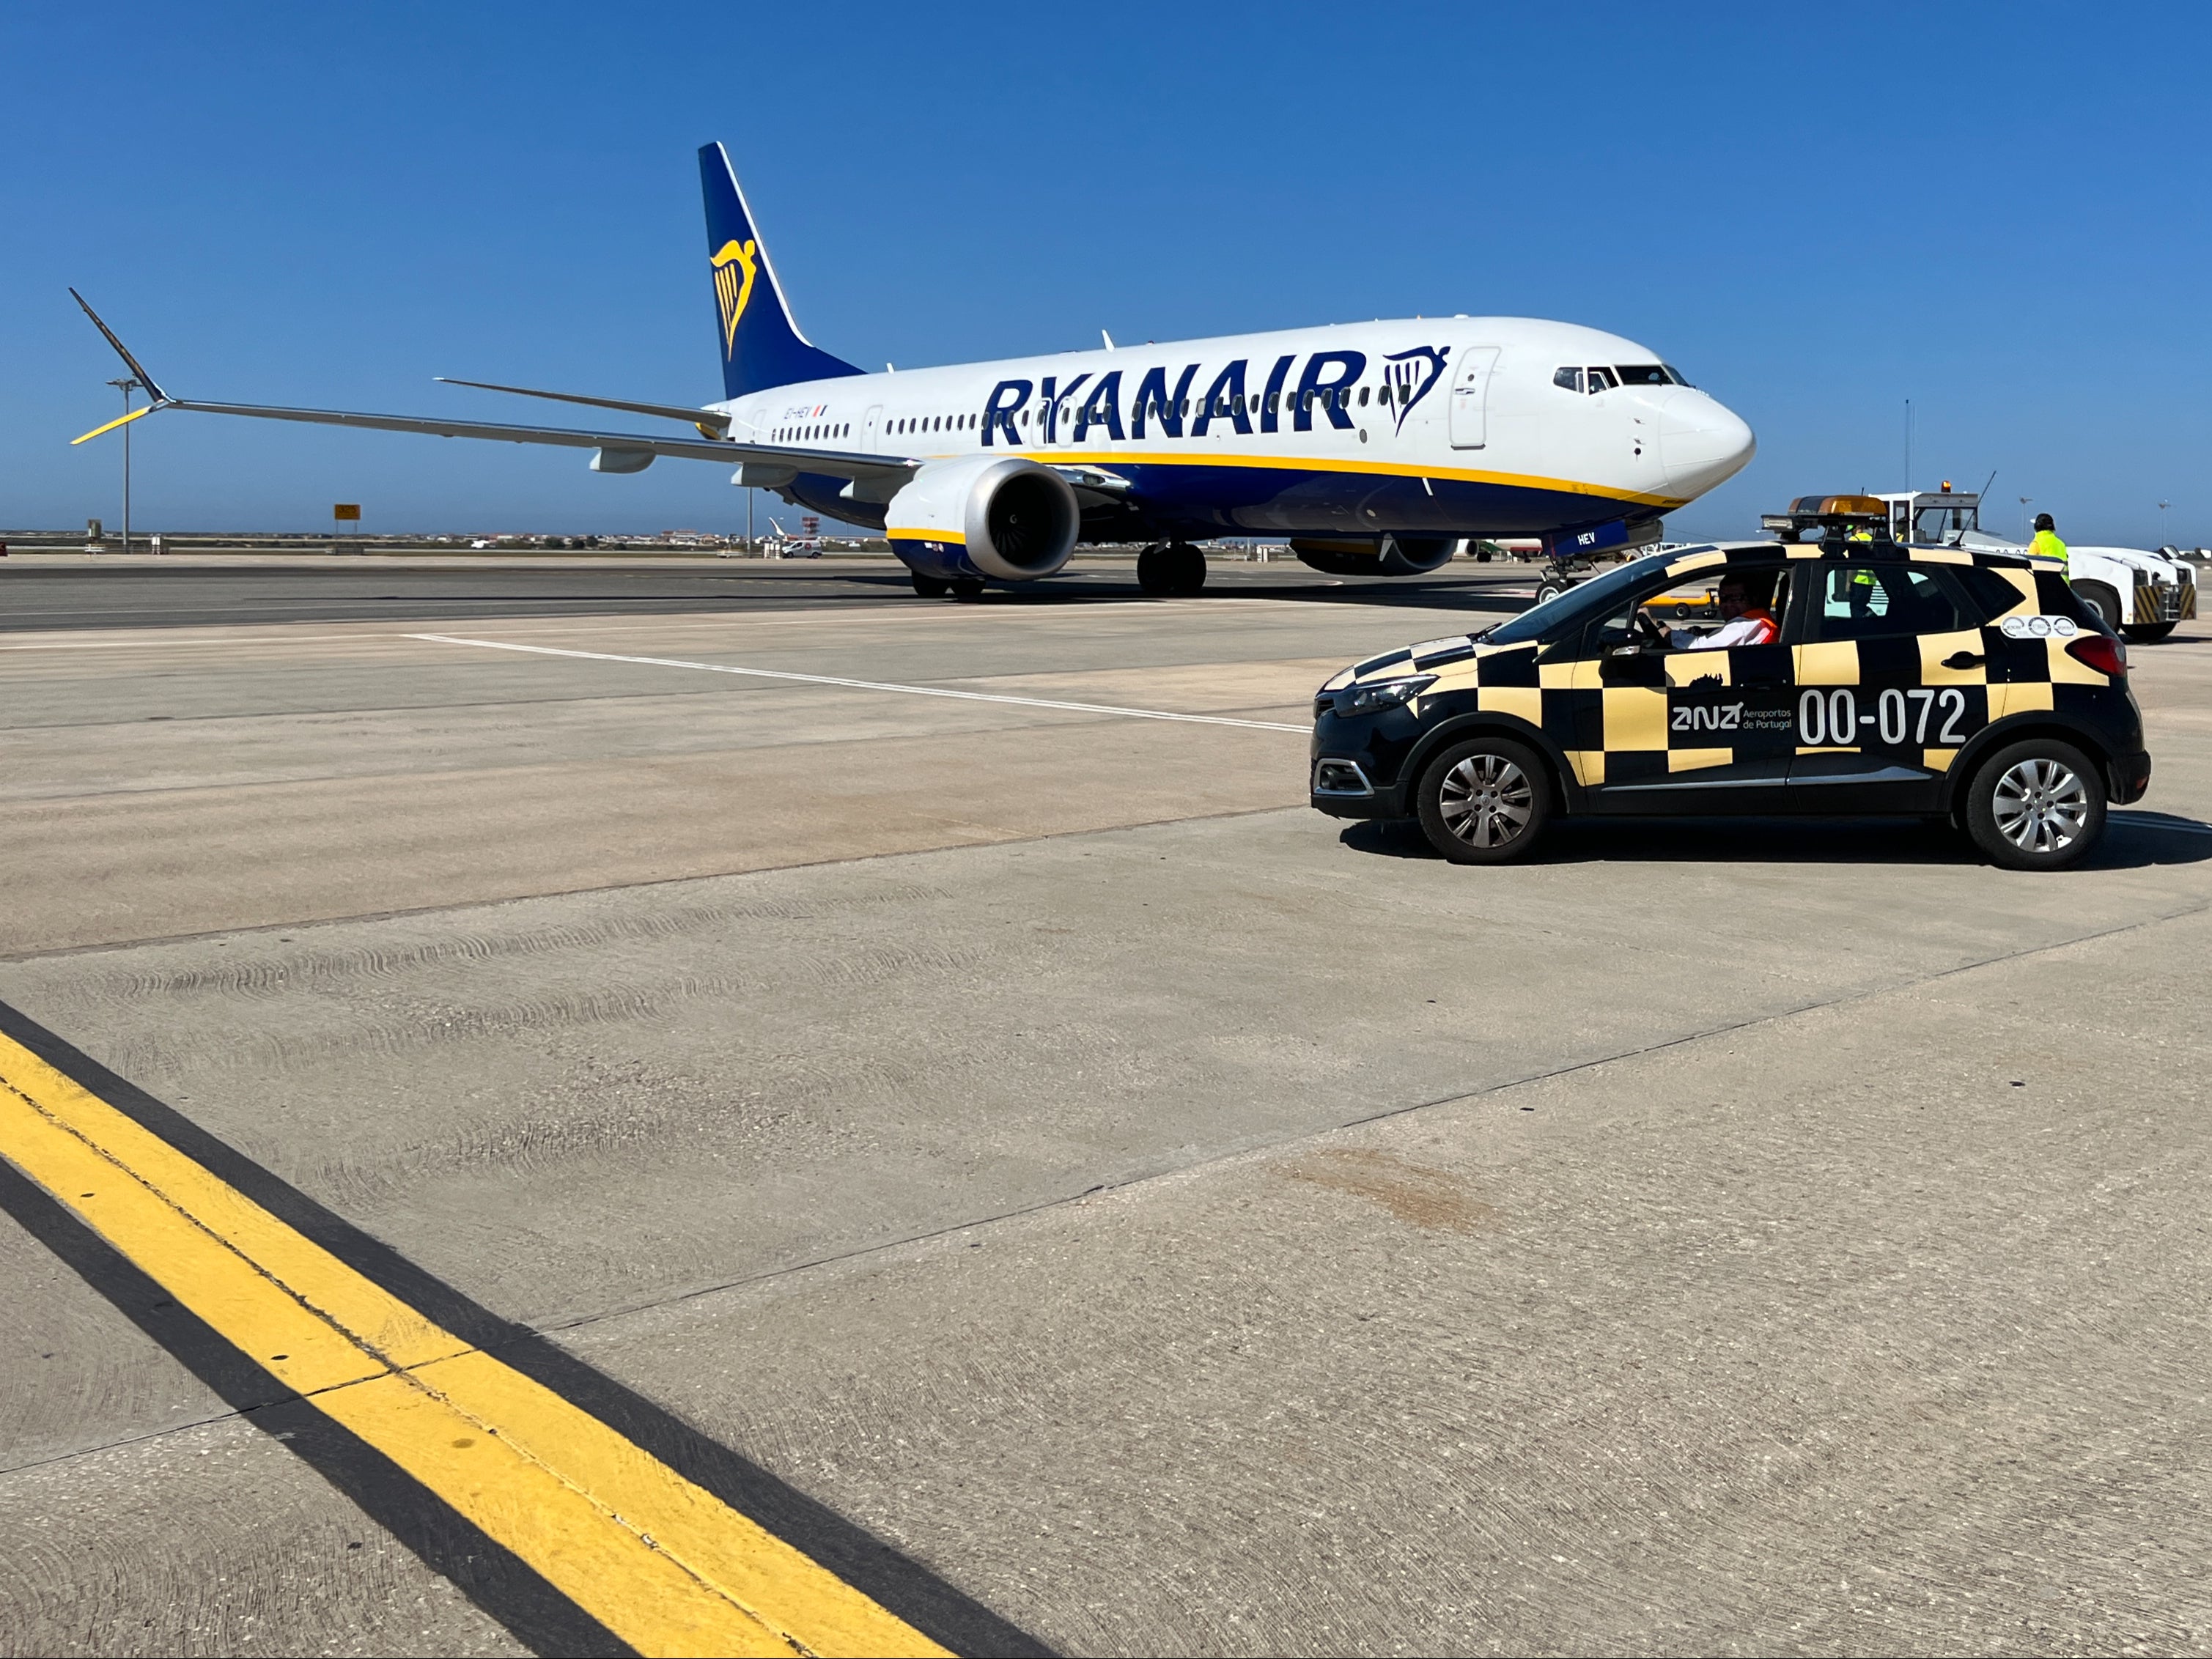 Blue is the colour: Ryanair Boeing 737 Max at Faro airport in Portugal, one of the routes chosen by Rangers fans heading for the Europa League final